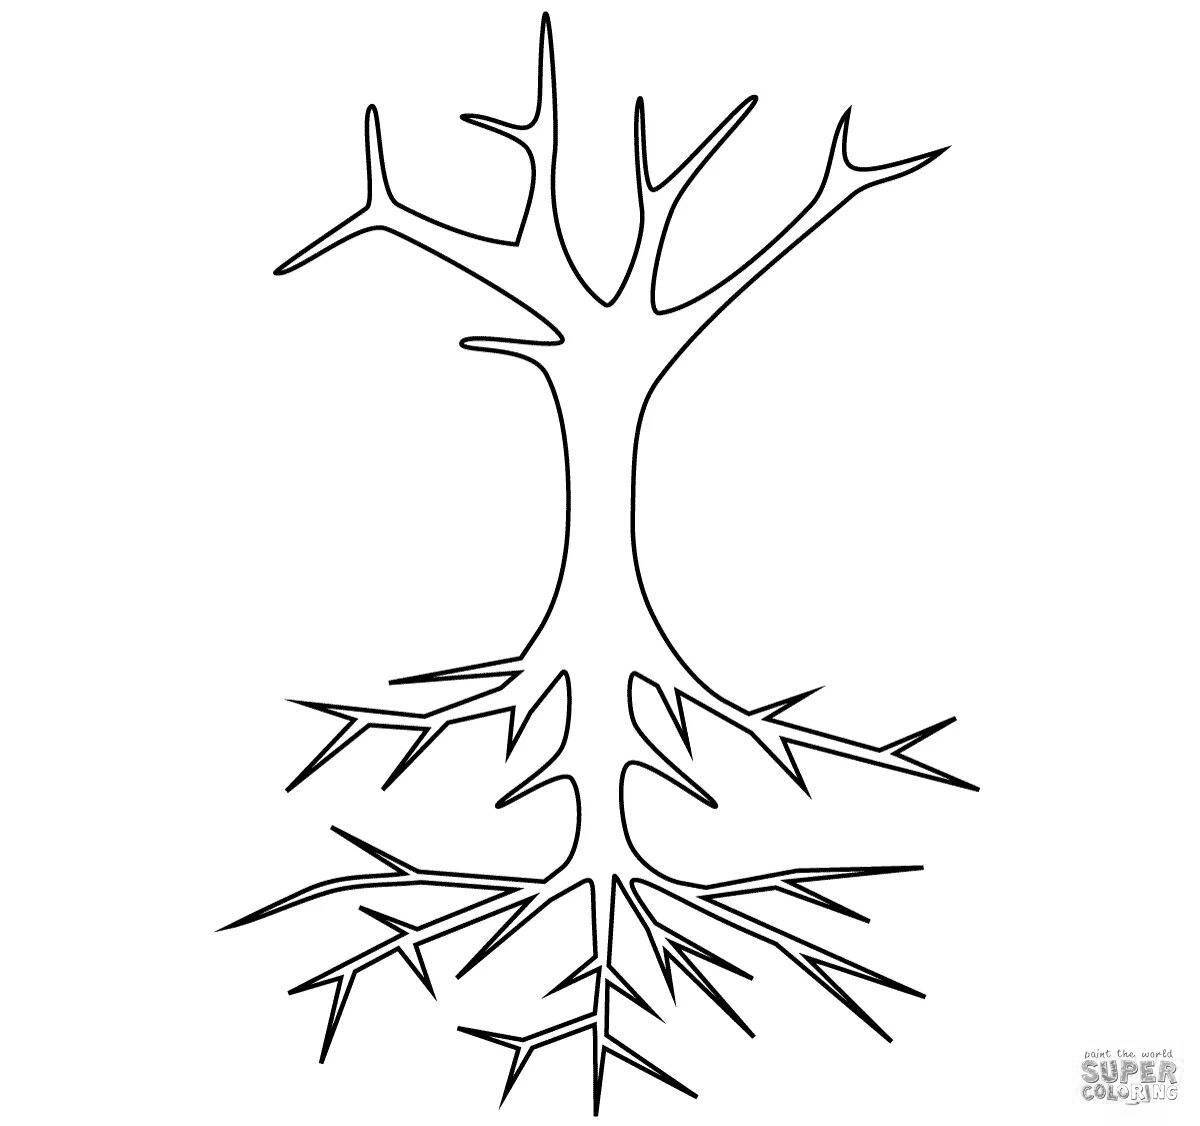 Wonderful coloring tree without leaves outline